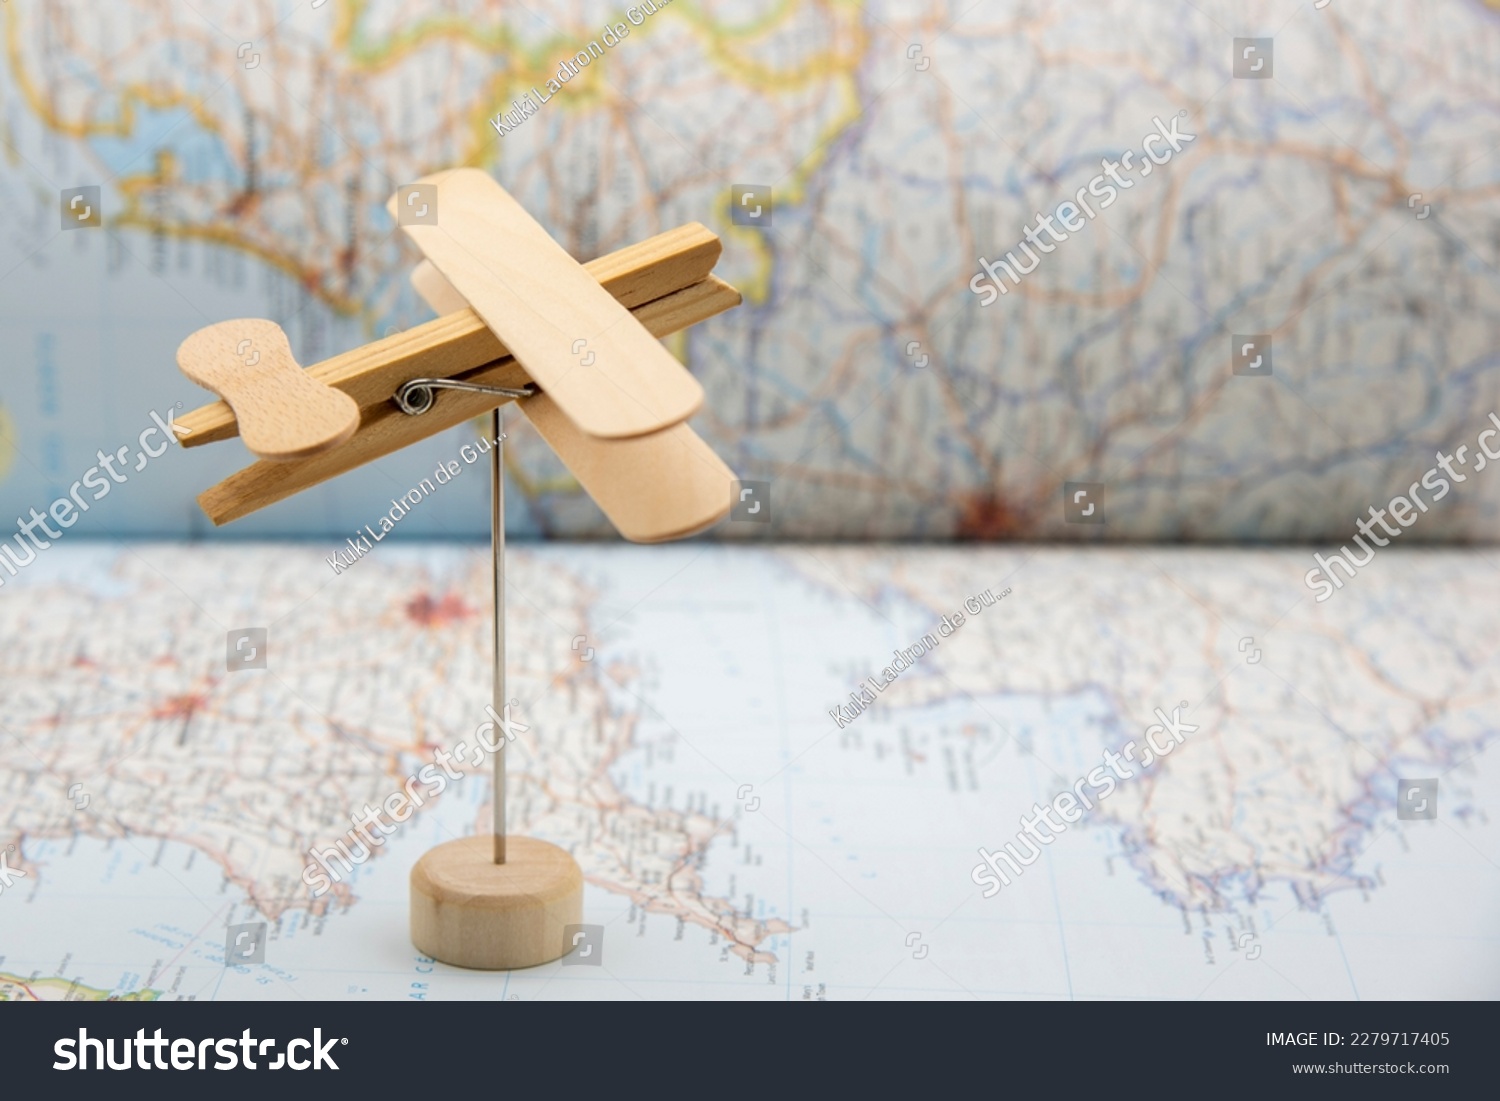 Wooden plane made with ice cream sticks and a clothespin, flying over a map #2279717405